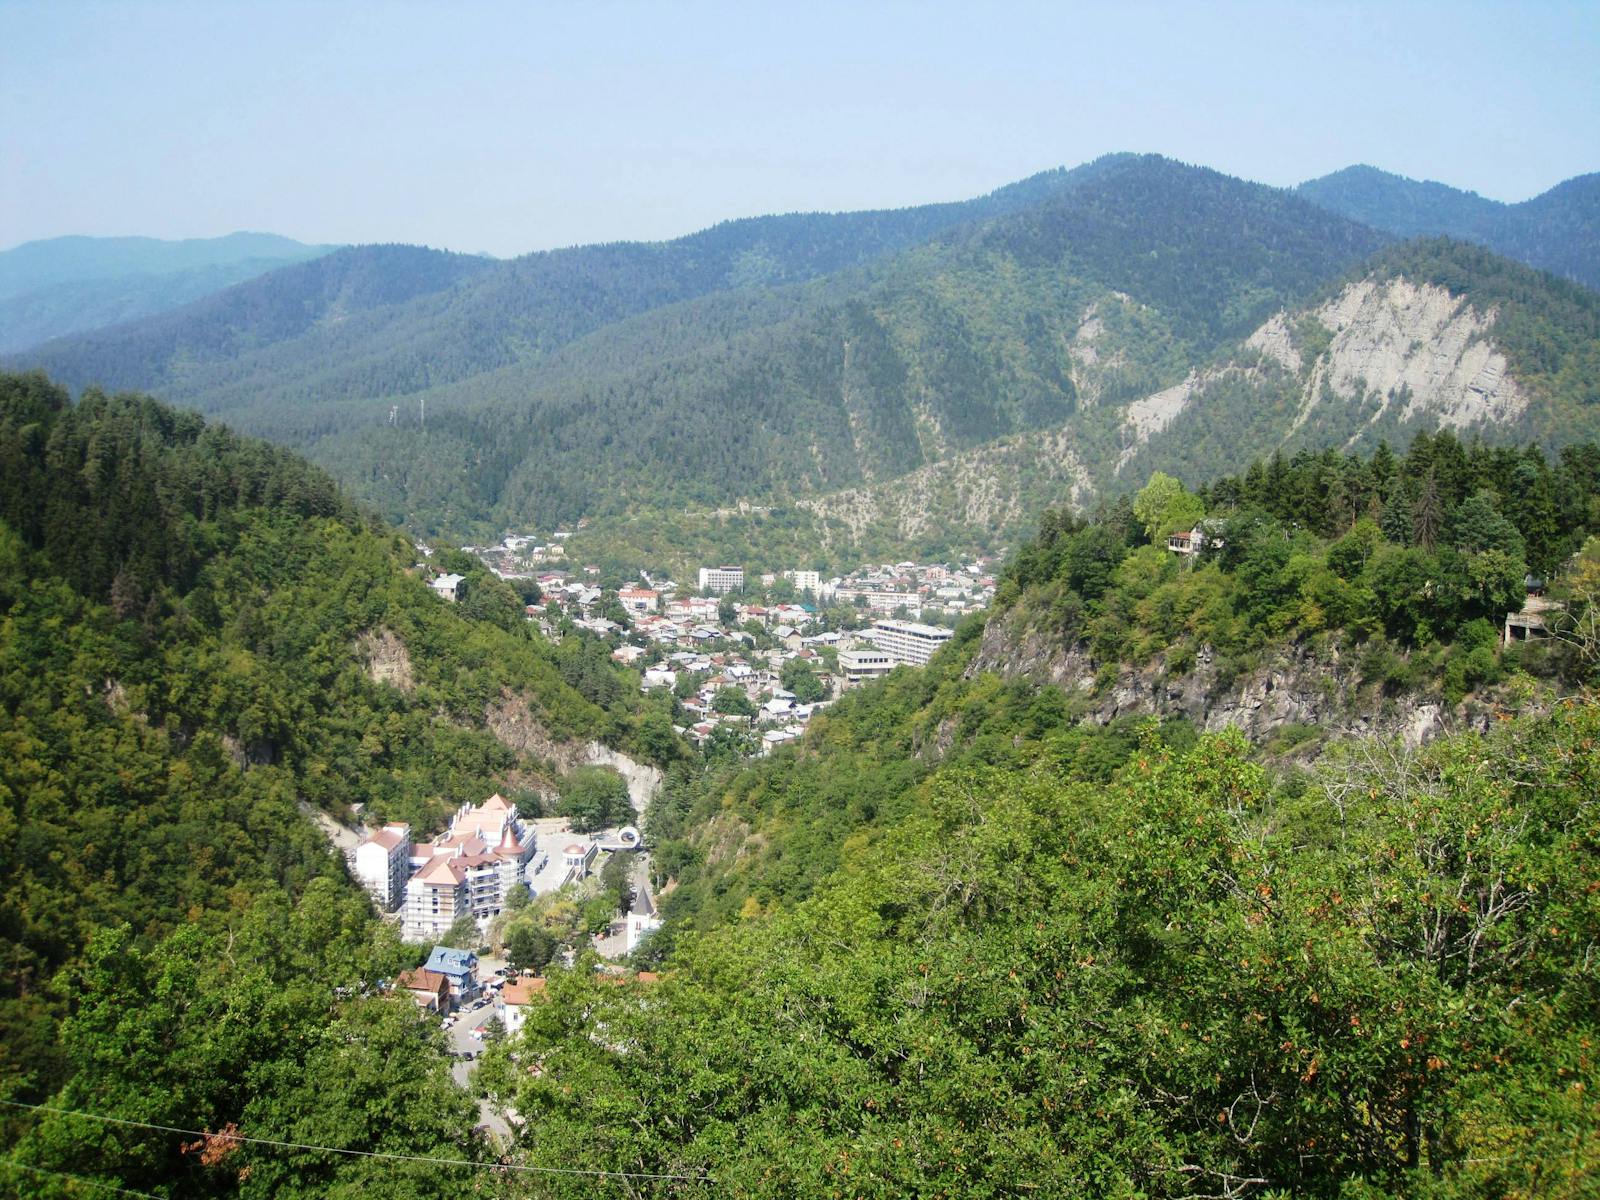 Caucasus Mixed Forests